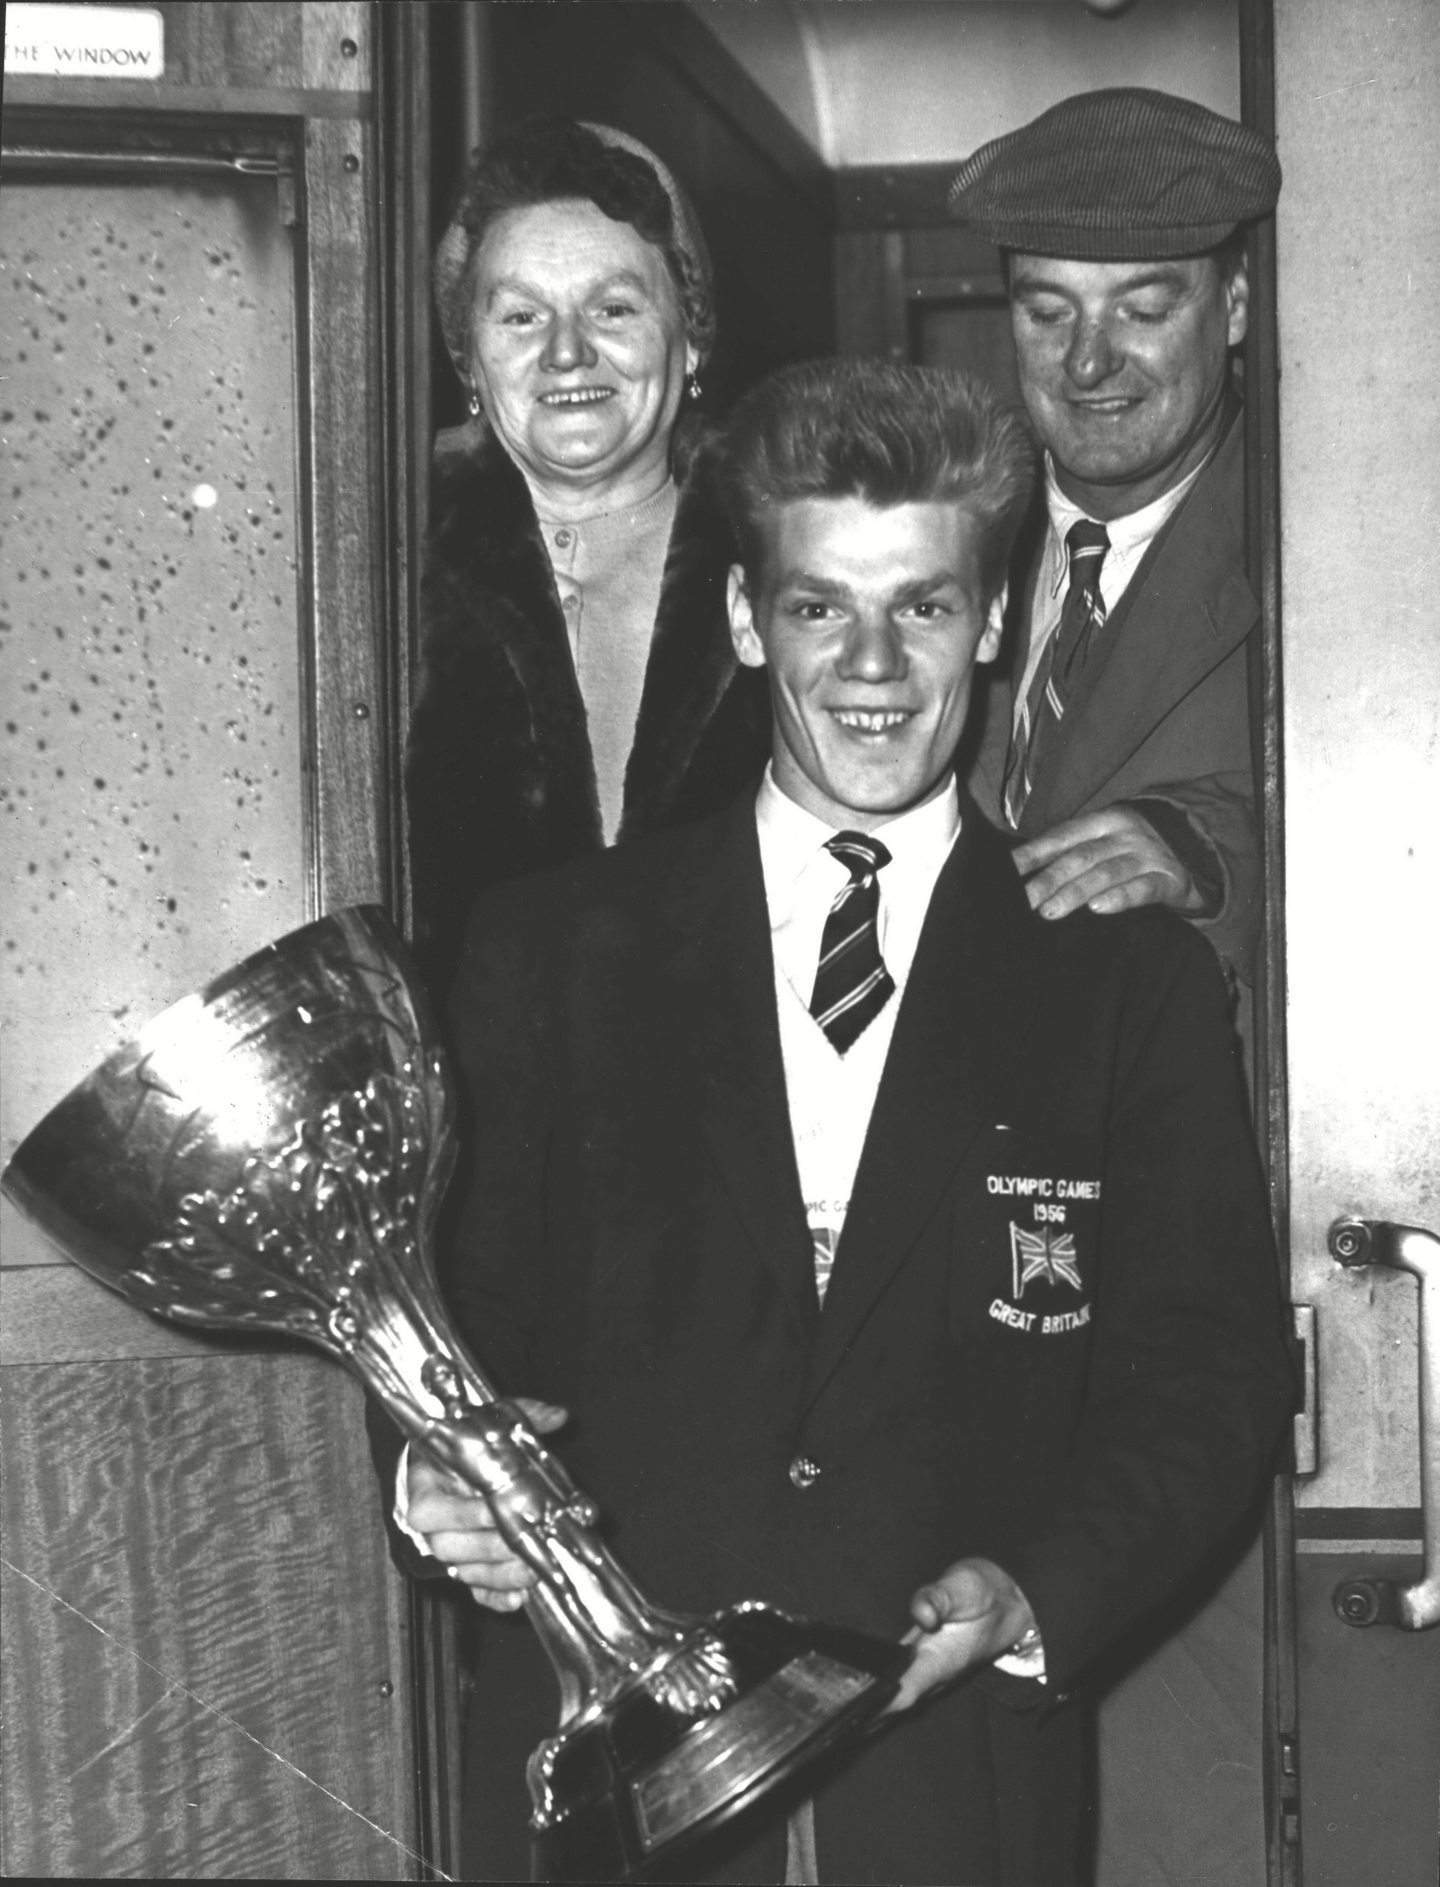 McTaggart in 1956 with the Val Barker trophy, which he won for being the most stylish boxer. Image: Shutterstock.